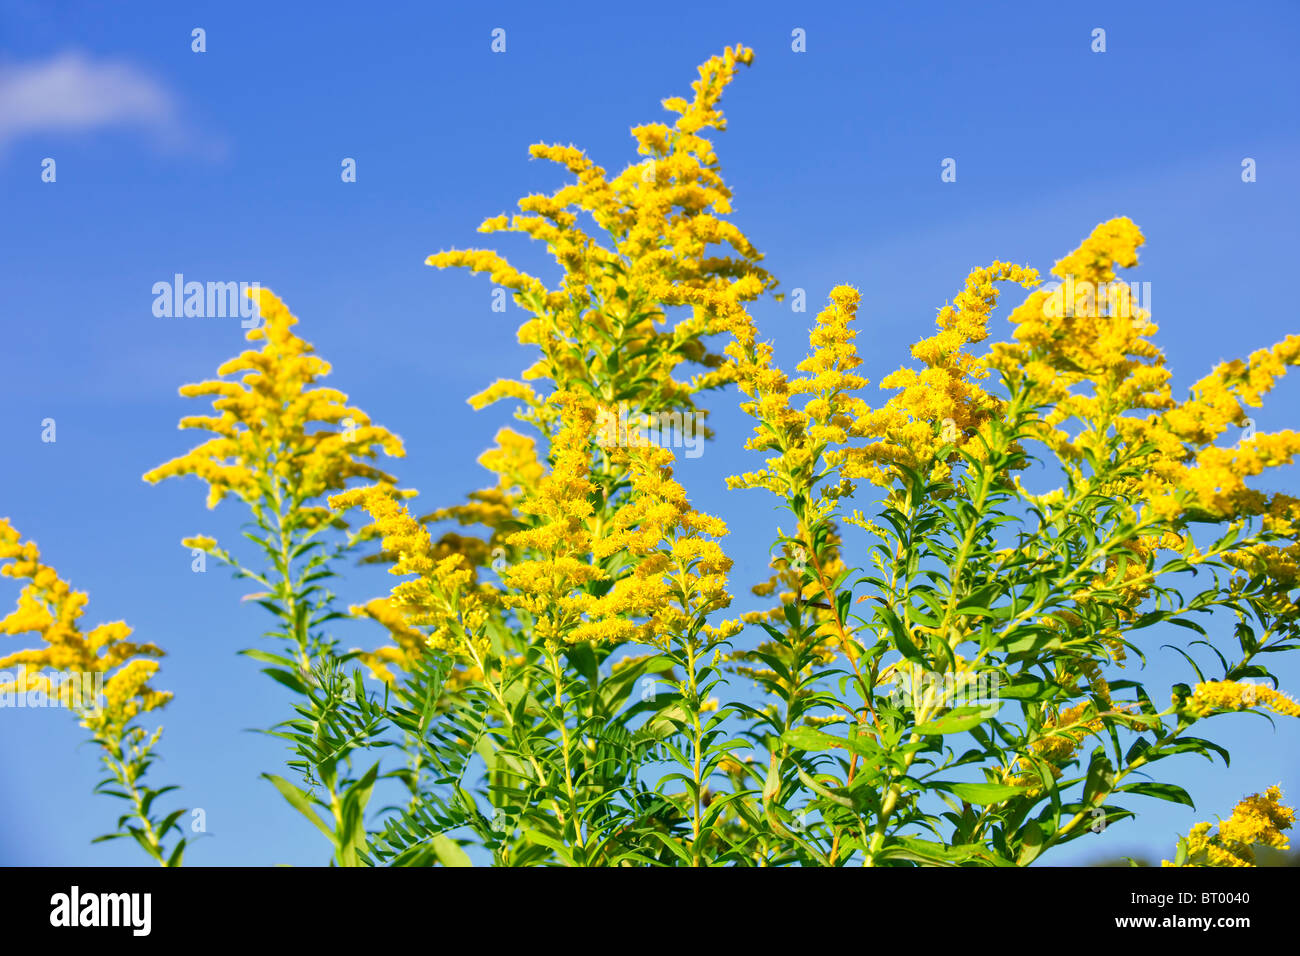 Blooming goldenrod plant on blue sky background Stock Photo